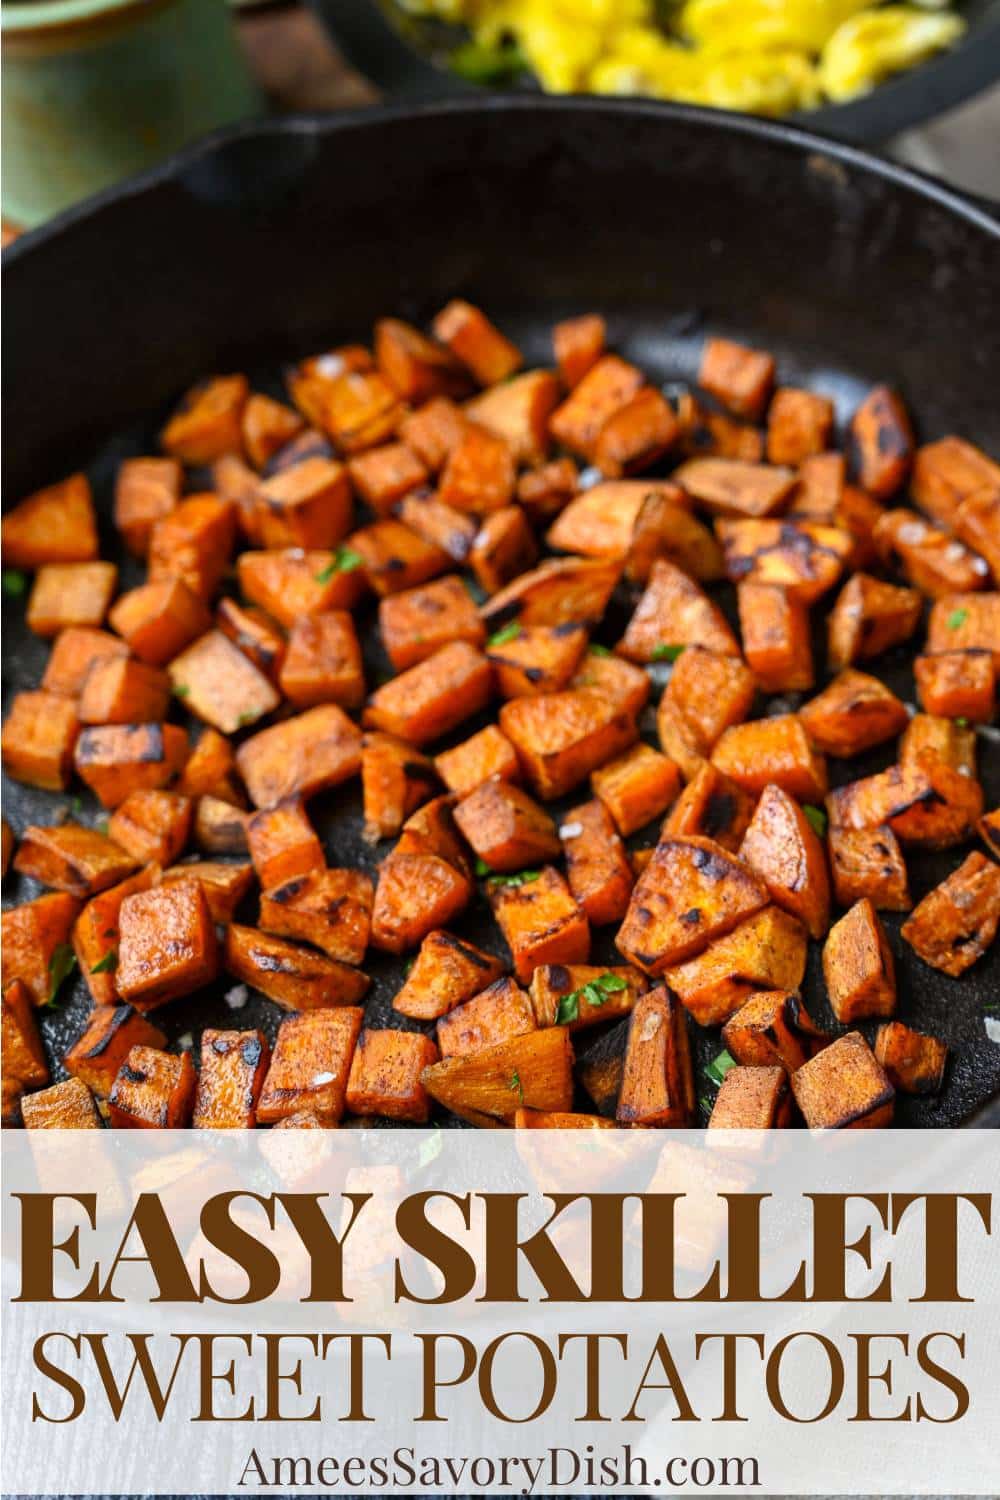 A quick and easy stove-top method for making deliciously crispy skillet sweet potatoes in less than 20 minutes. via @Ameessavorydish